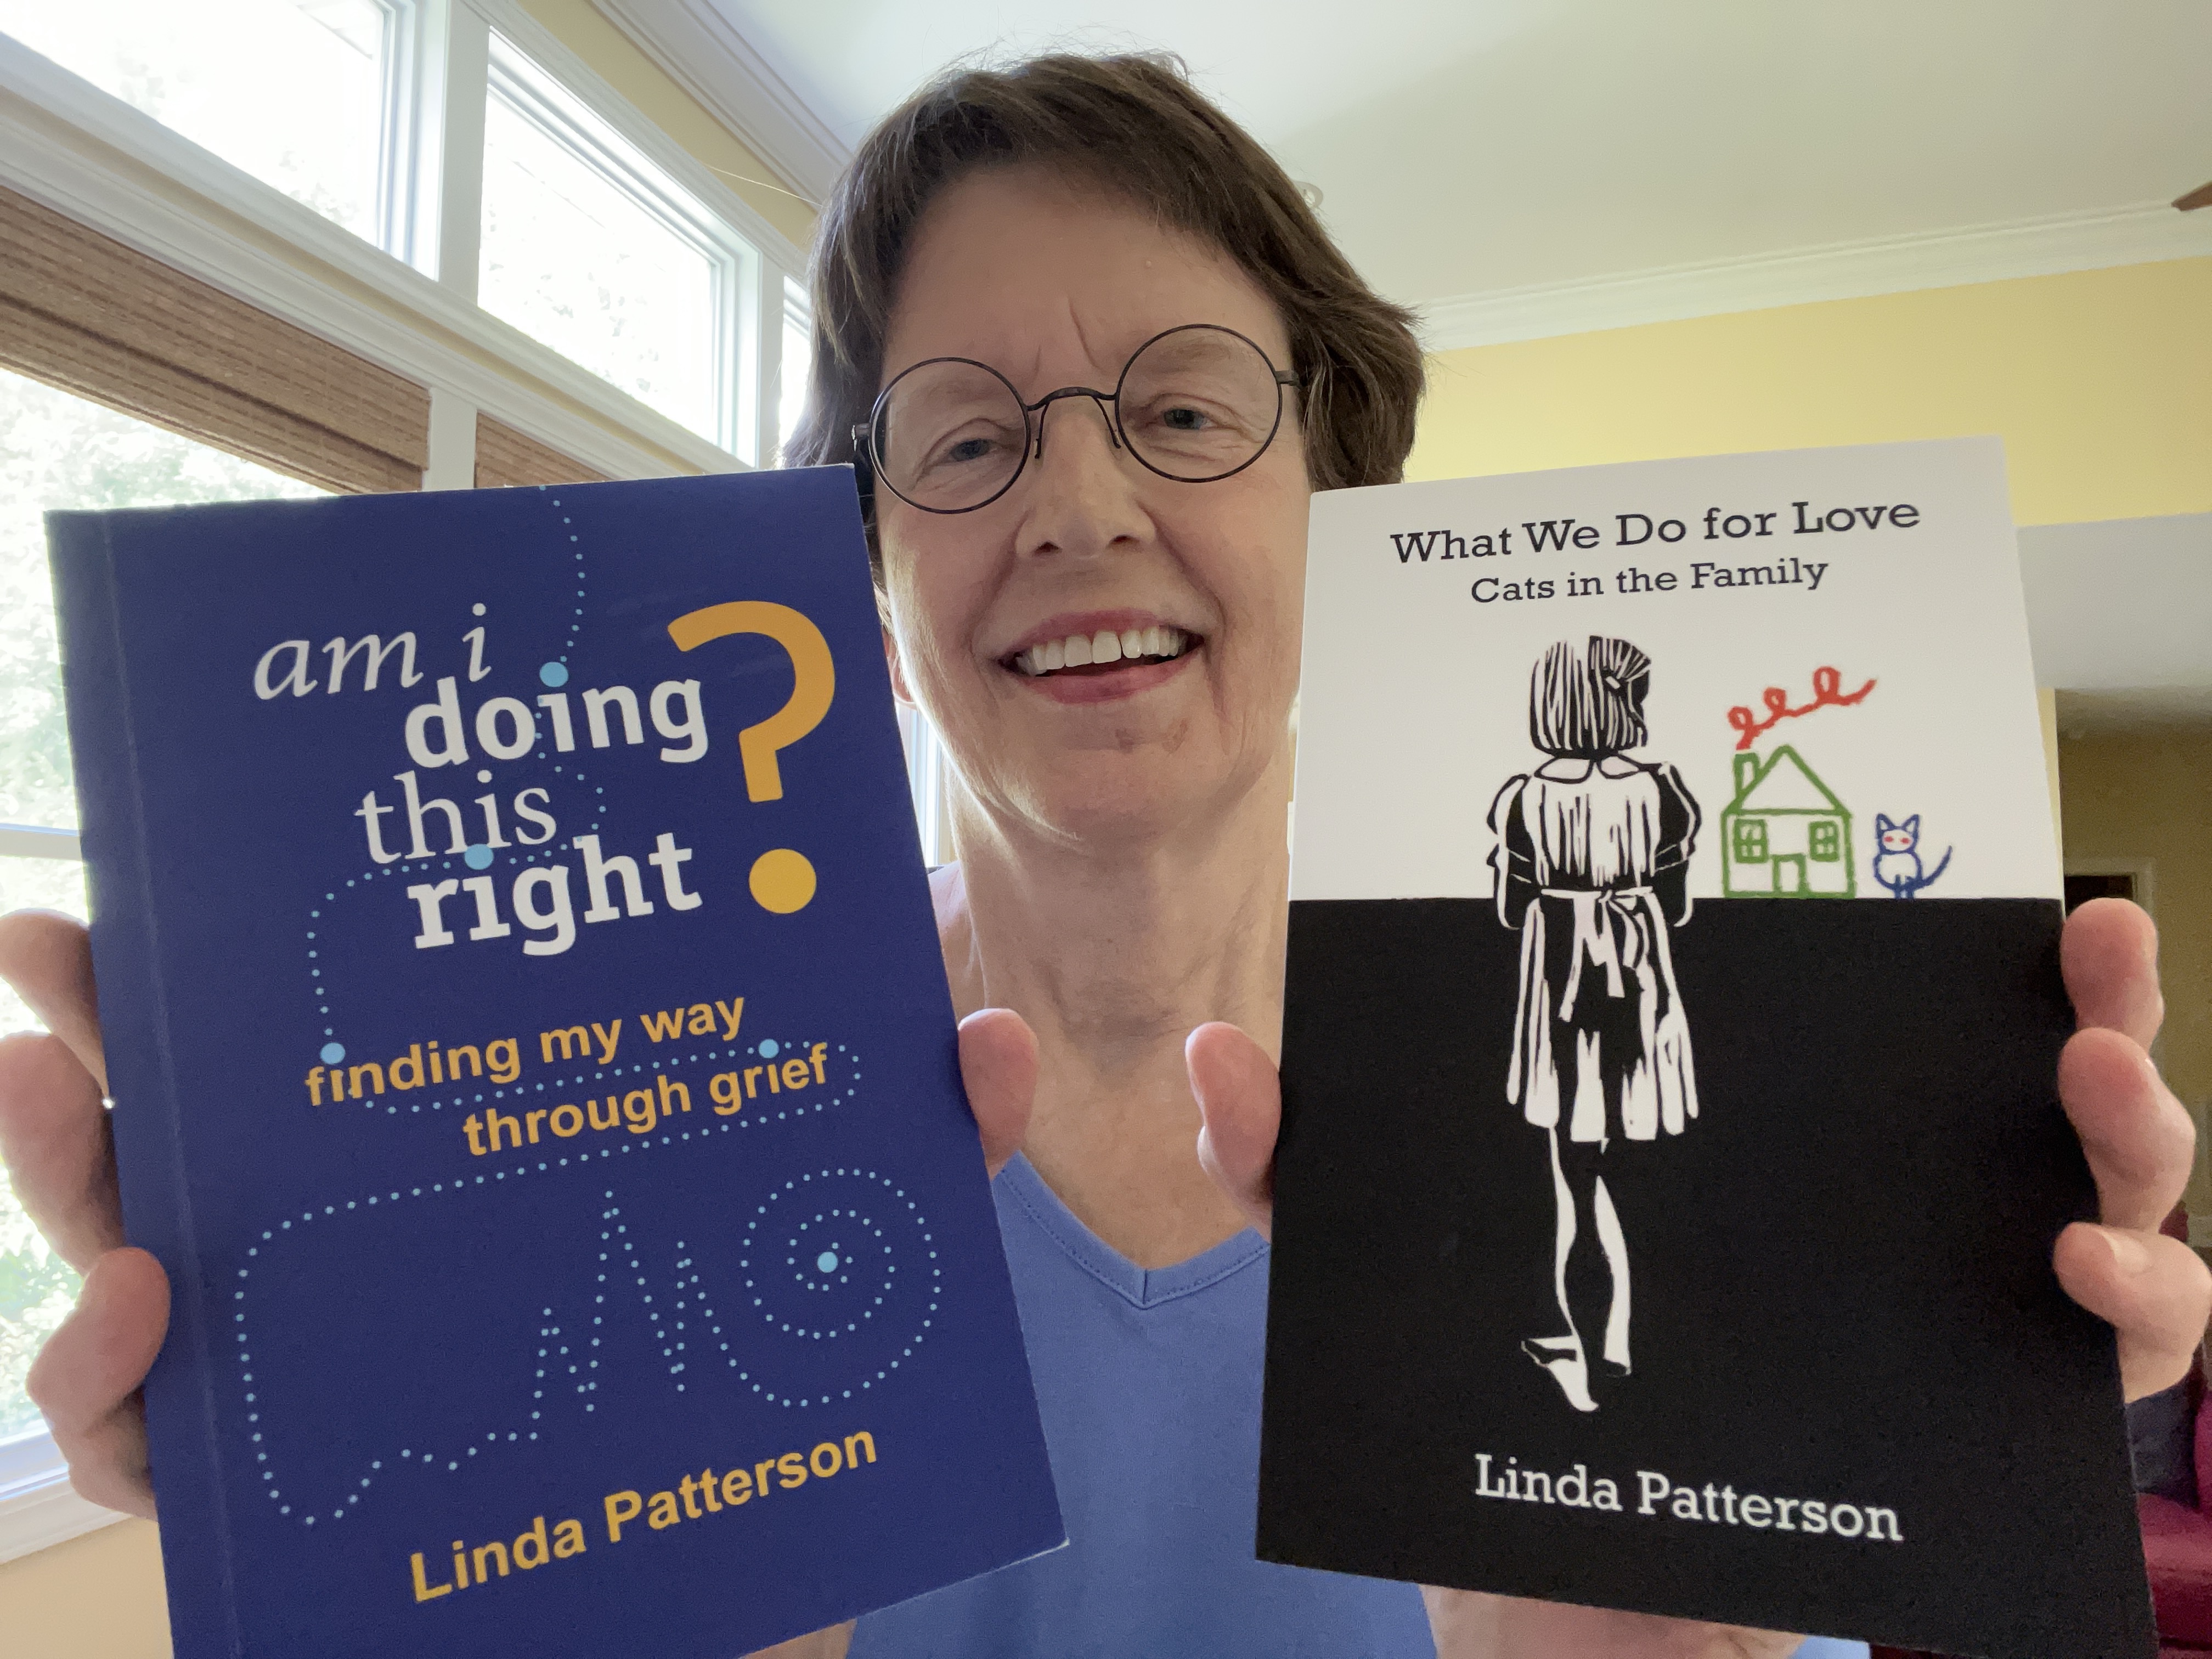 linda-patterson-with-books.jpg